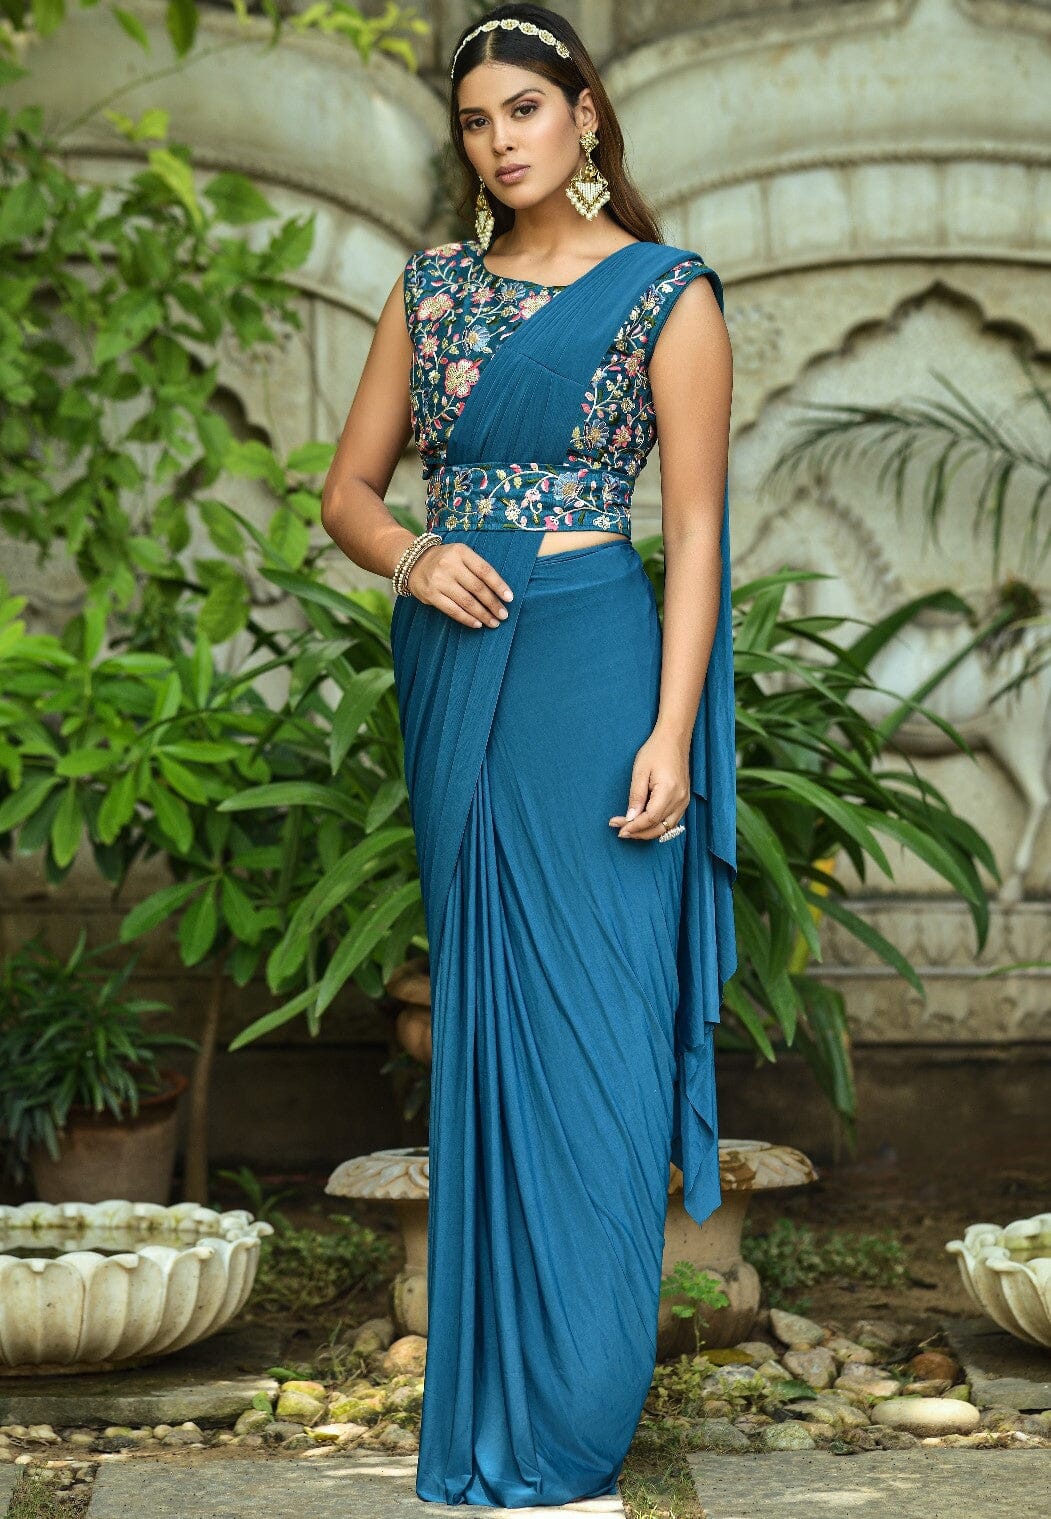 Blue Solid Pleated Designer Ruffle Ready To Wear Saree Ready to Wear Saree Shopin Di Apparels 